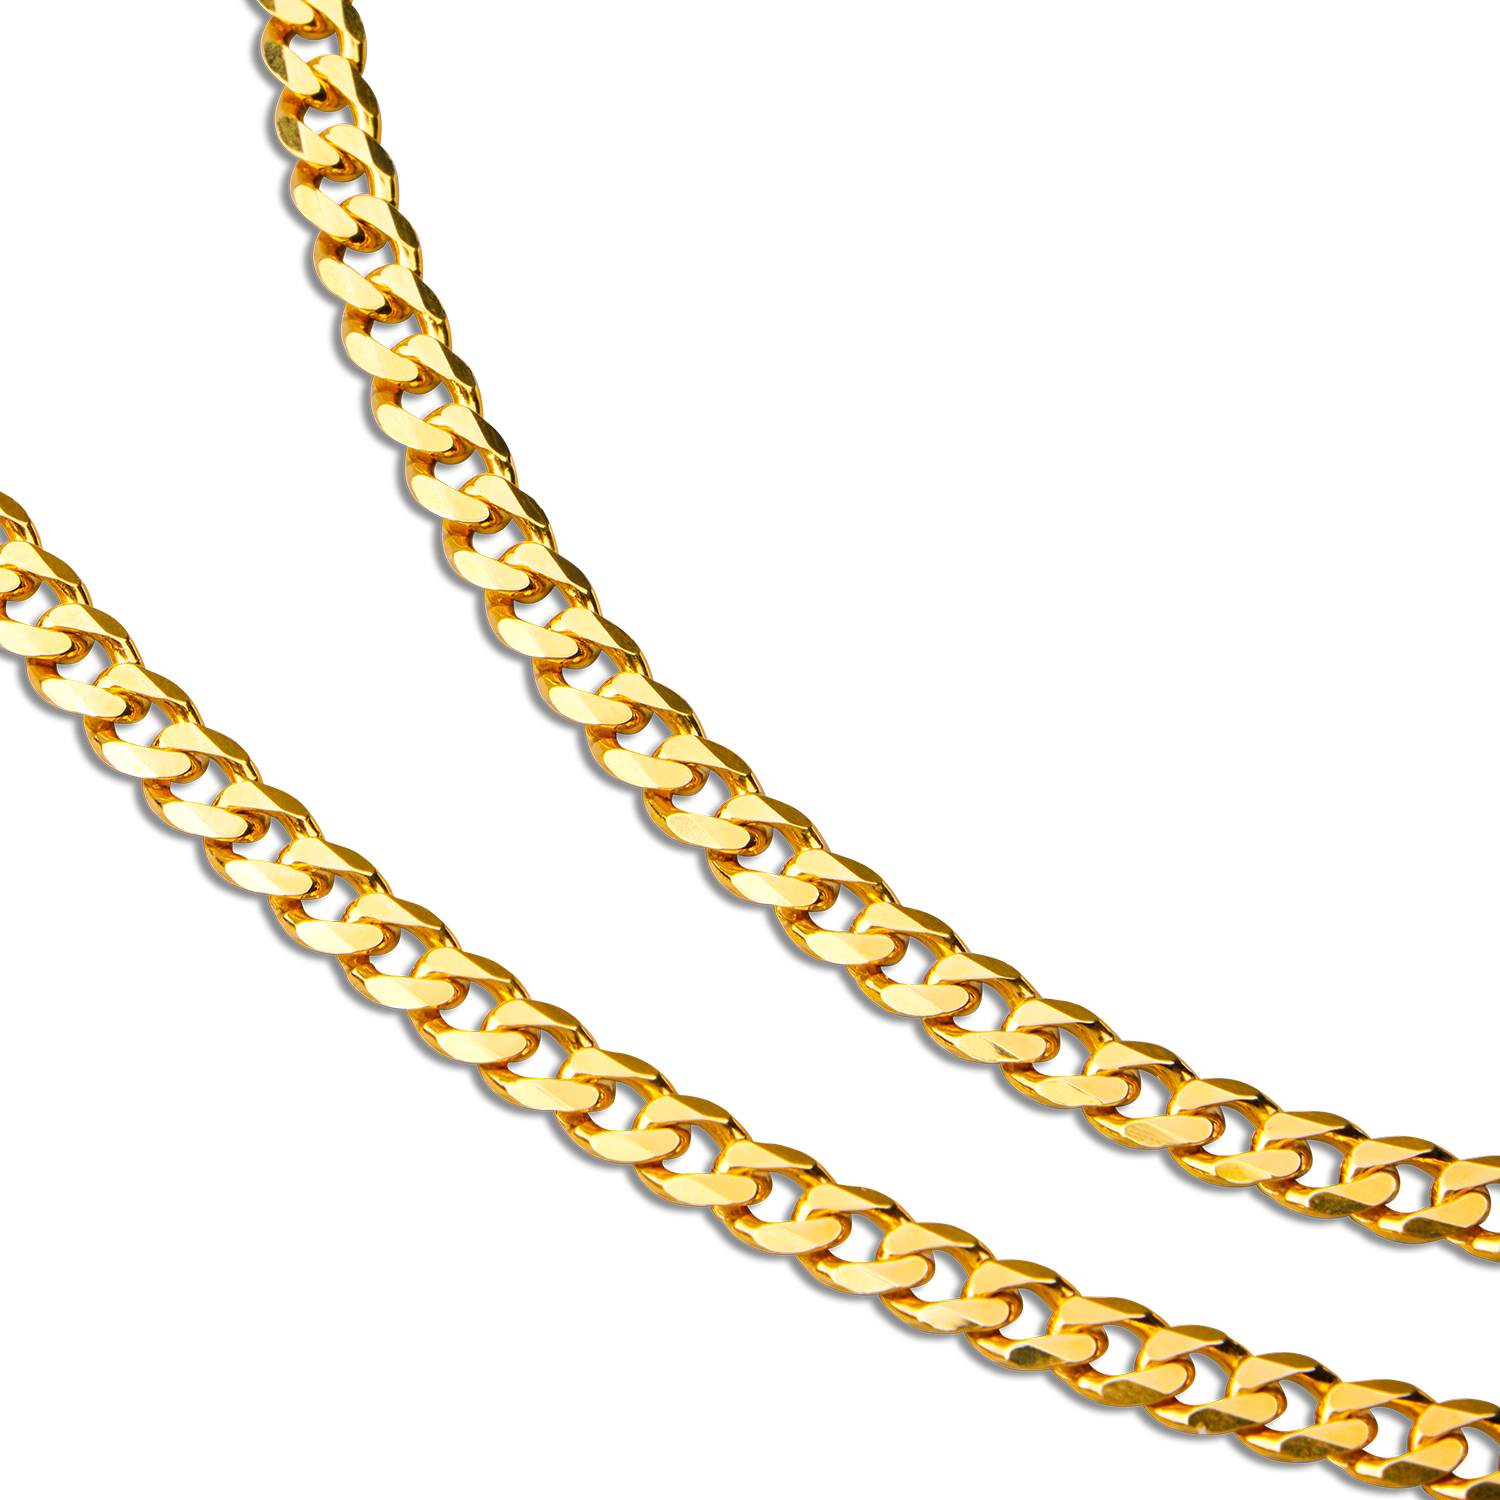 1pc 5mm Golden Link Chain Cuban Necklace for Men and Women - Durable Copper, Electroplated with 18K Gold for Long-Lasting Shine and Style Jewelry